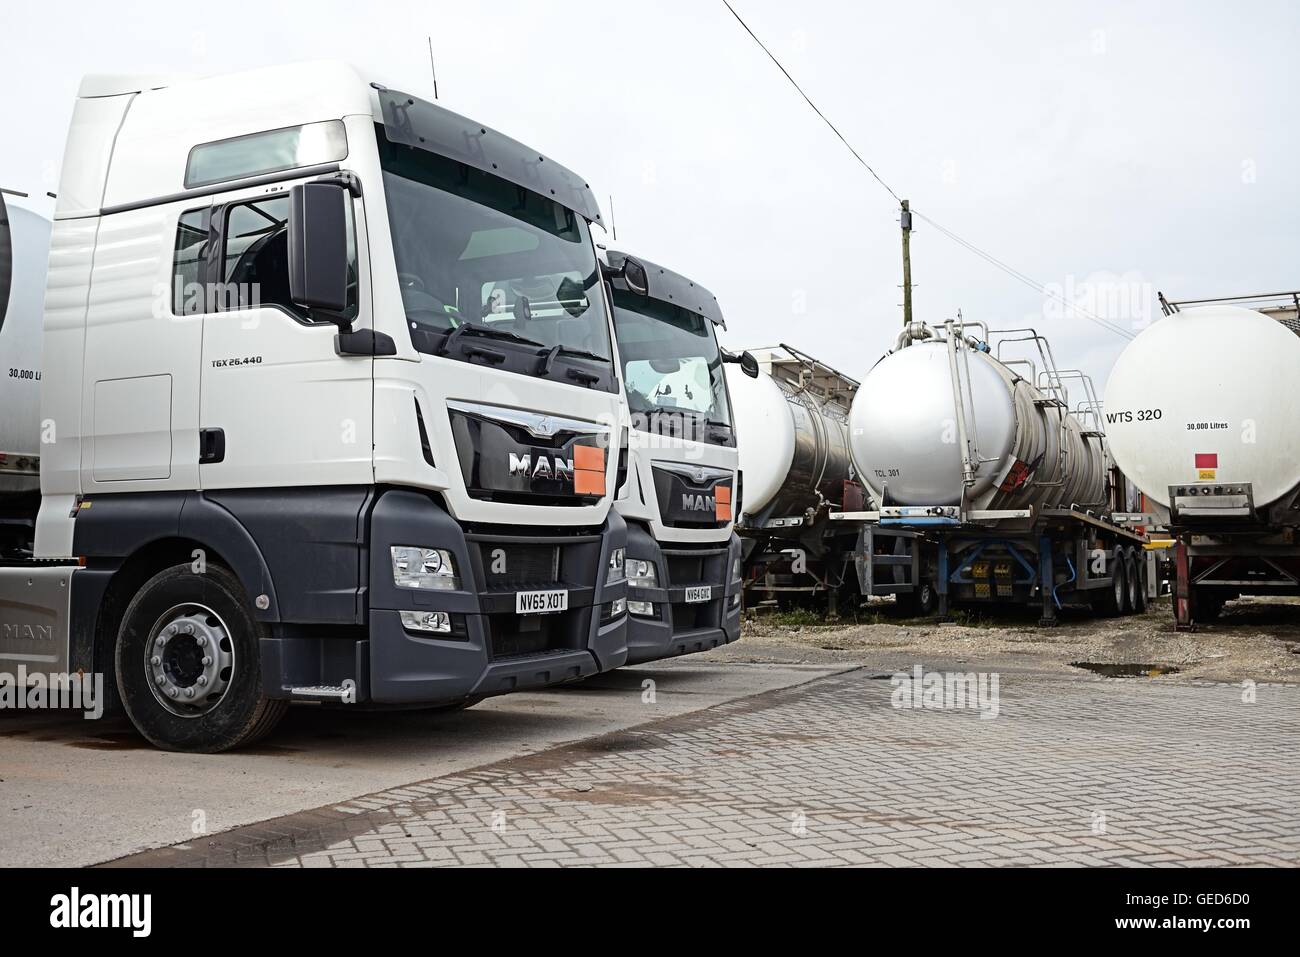 Man truck tractor units parked alongside tanker trailers in a haulage yard Stock Photo